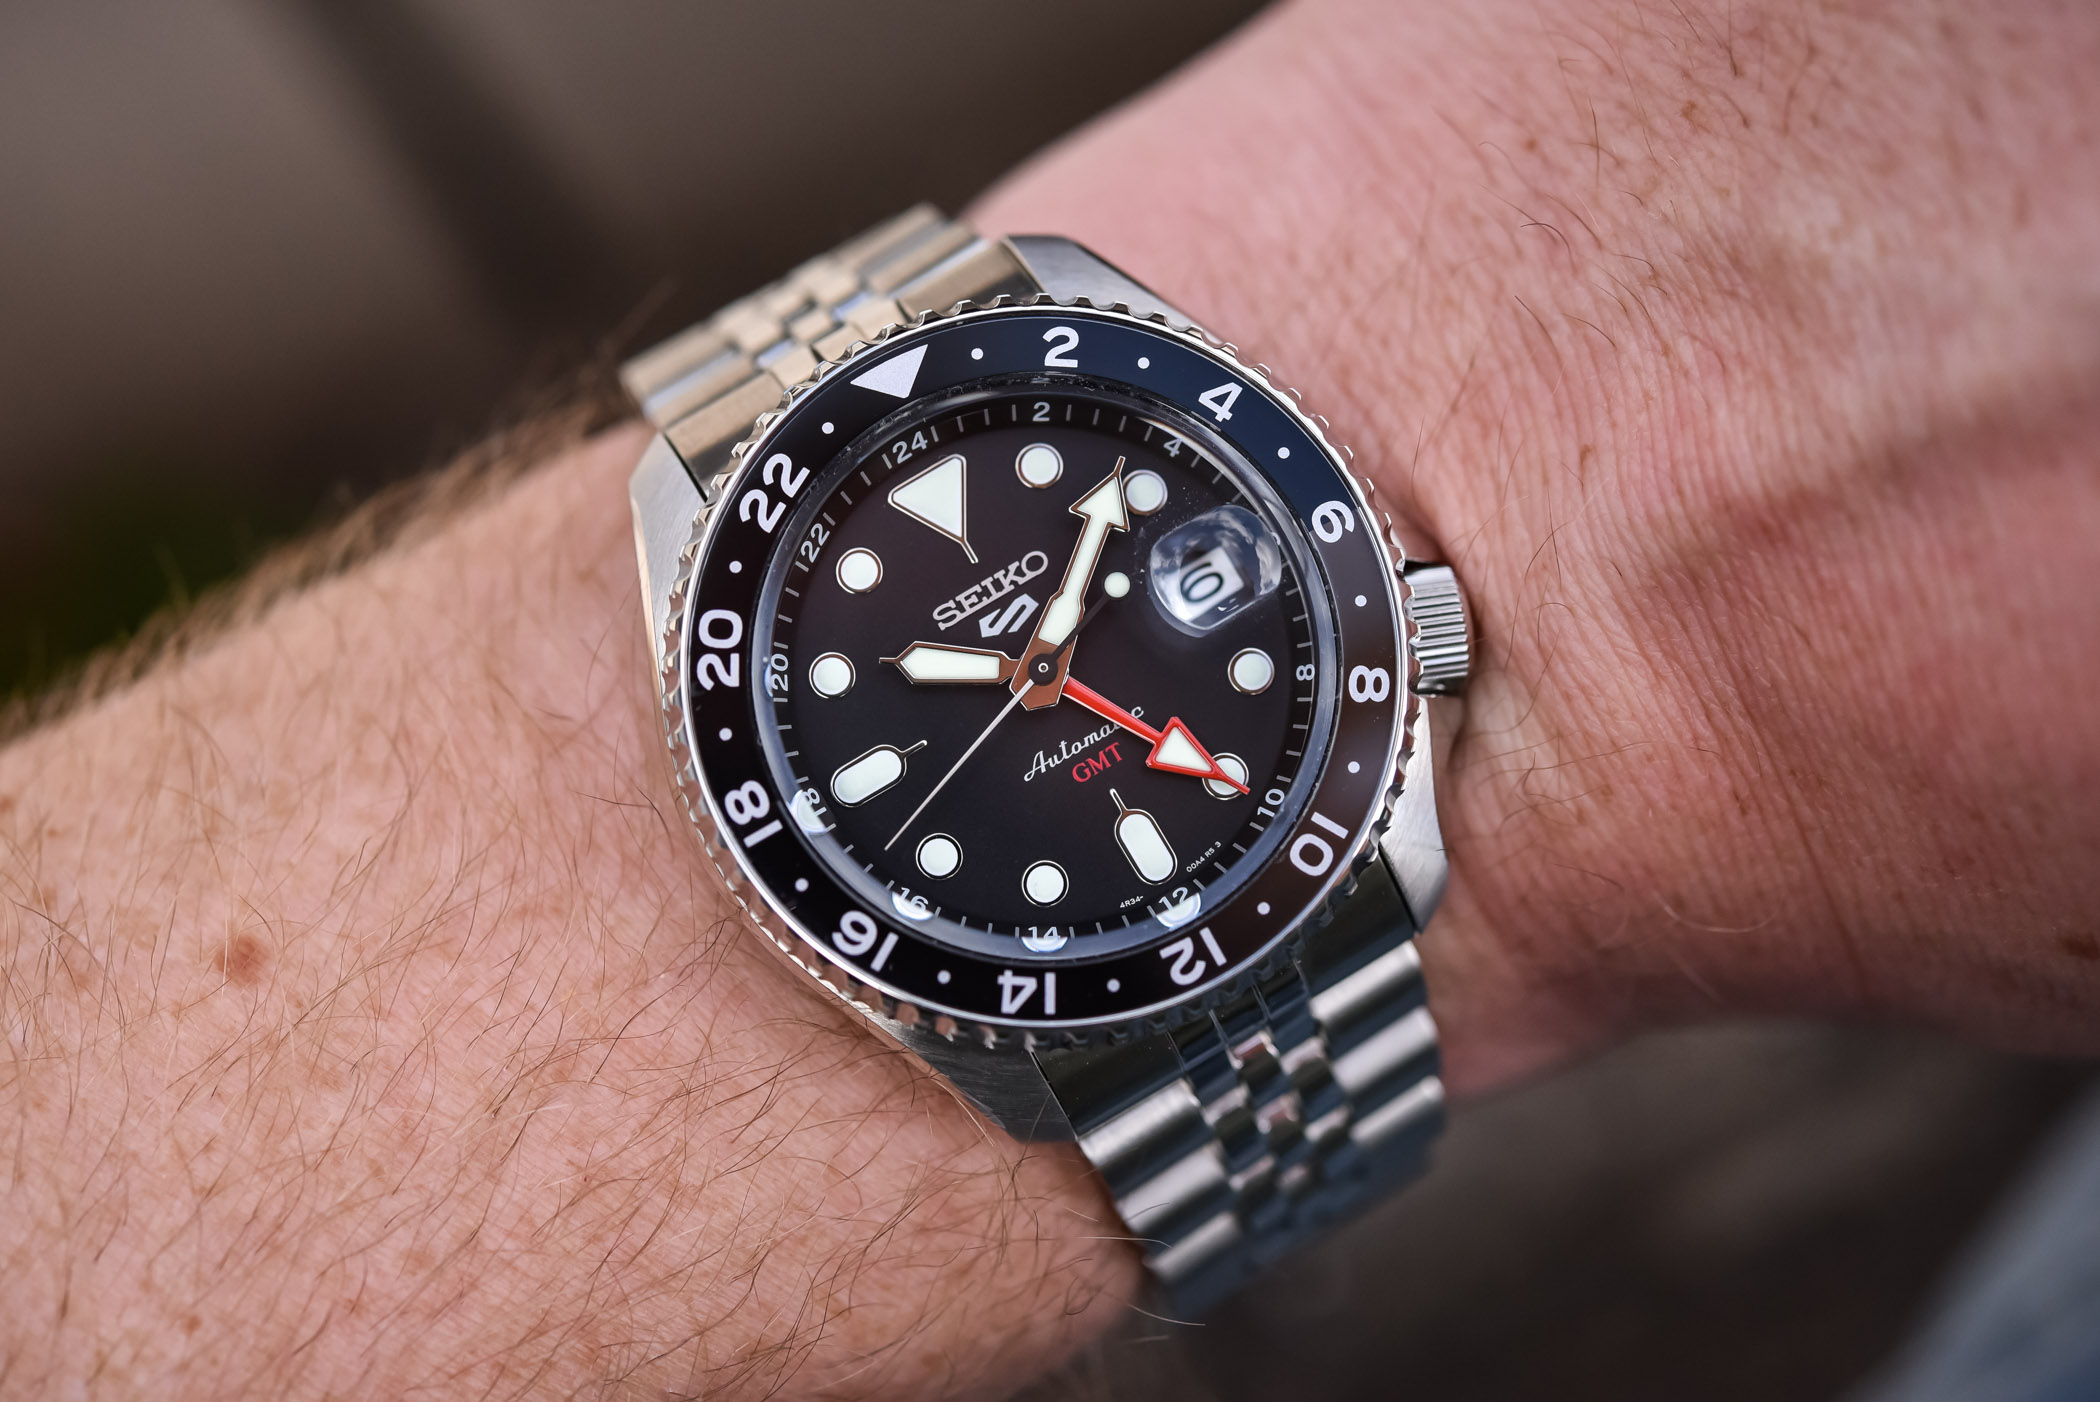 Seiko 5 Sports Style GMT Best Summer Watch - Opinion Review